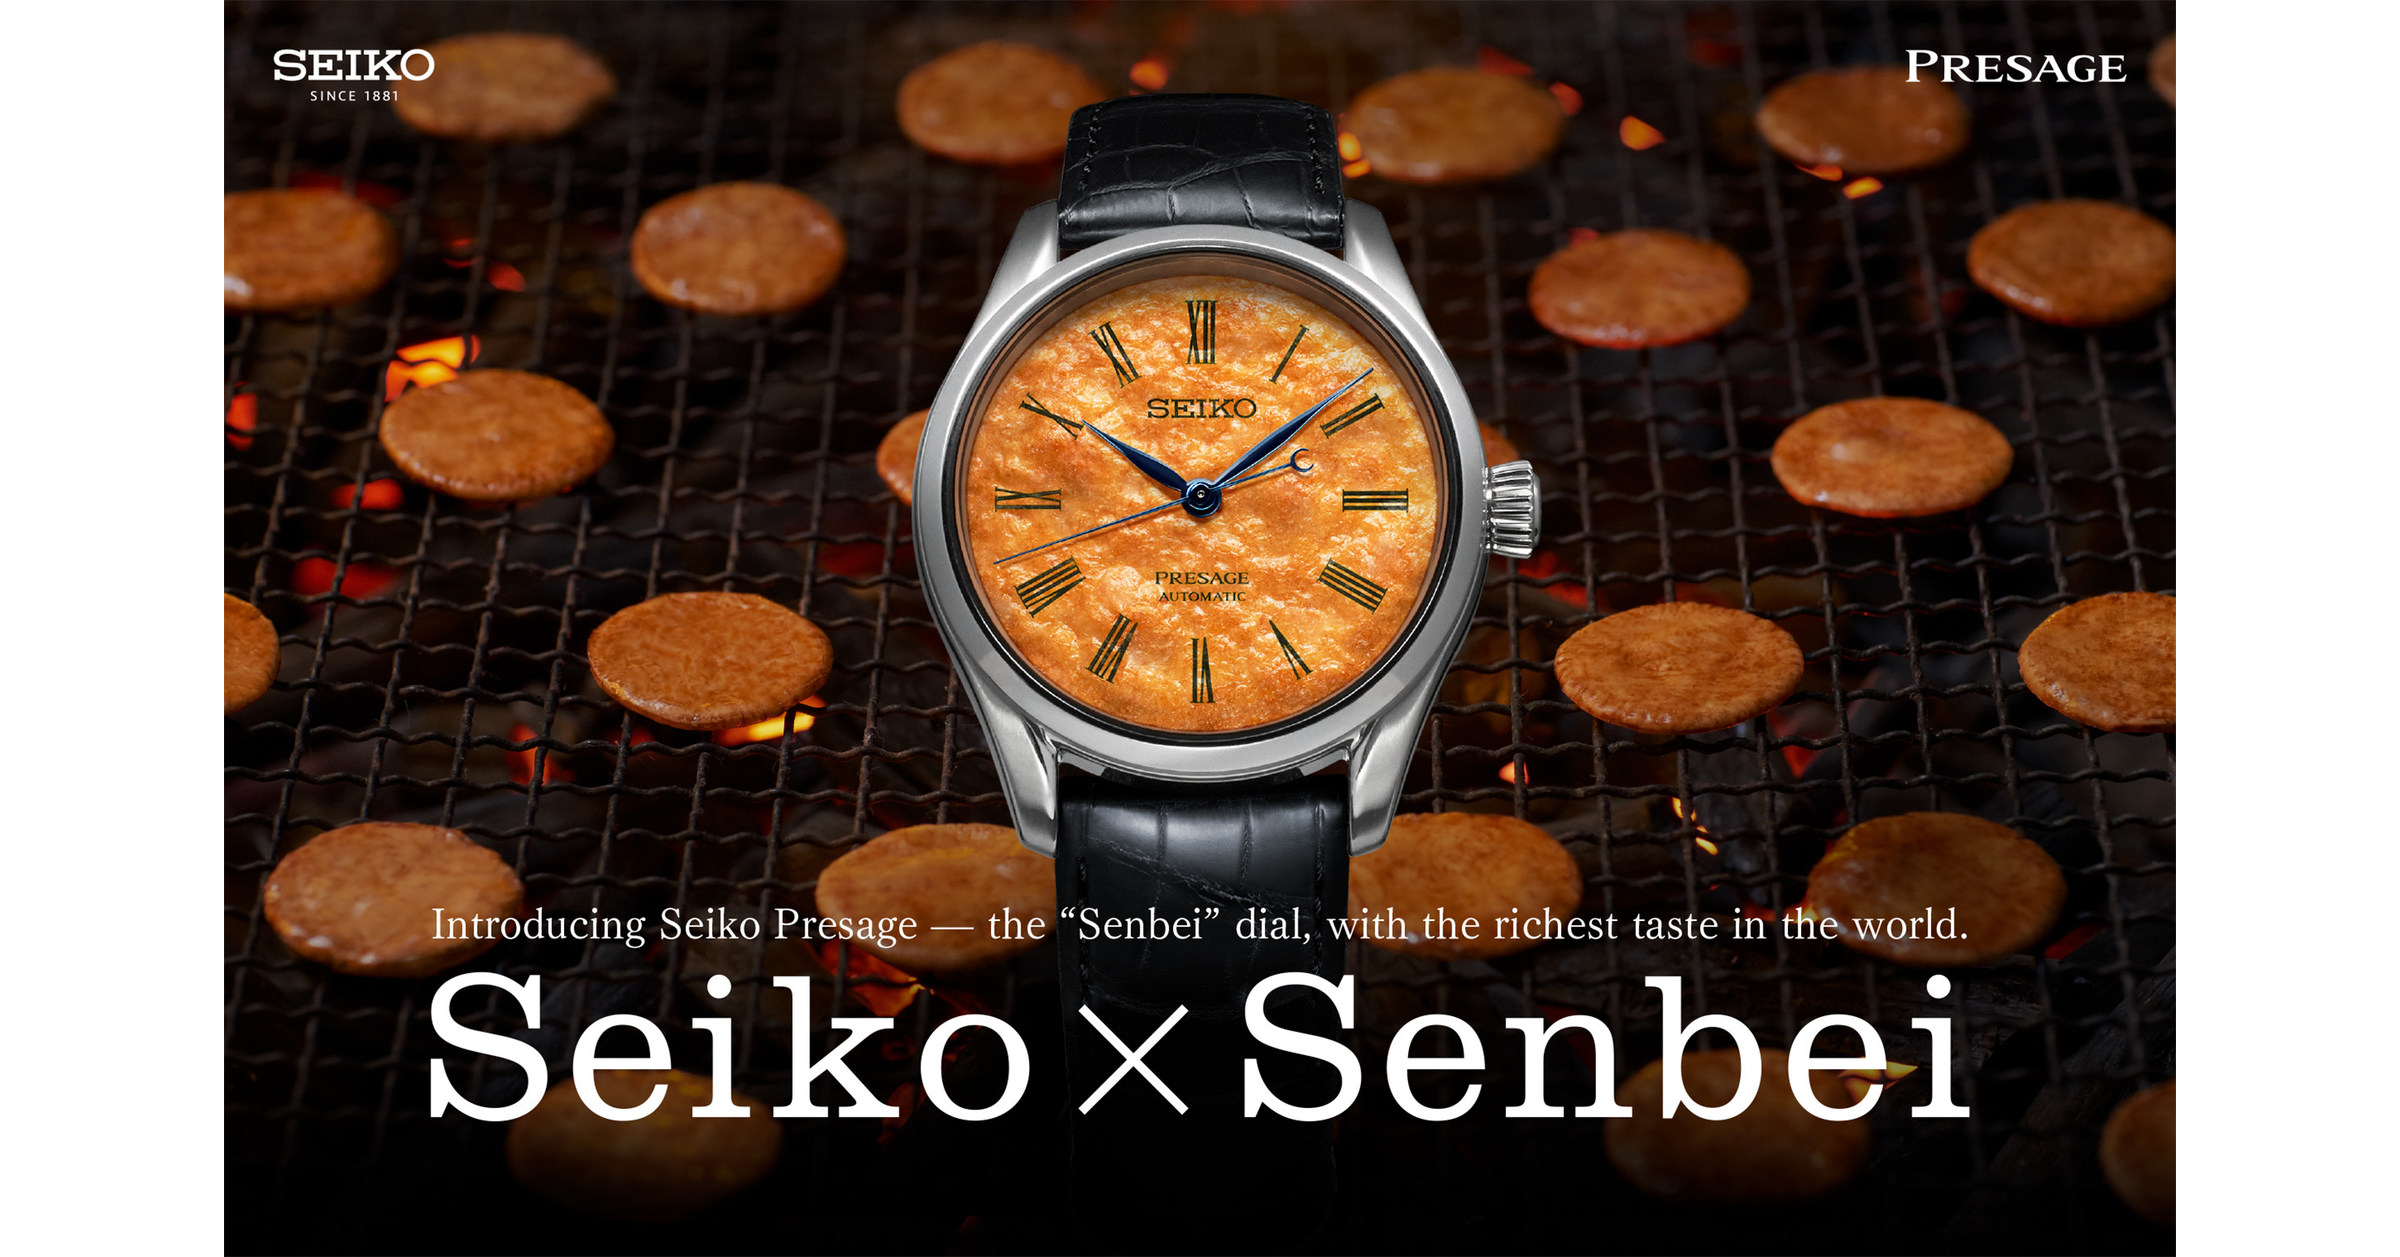 Seiko Presage introduces the richest taste in the world with the new 